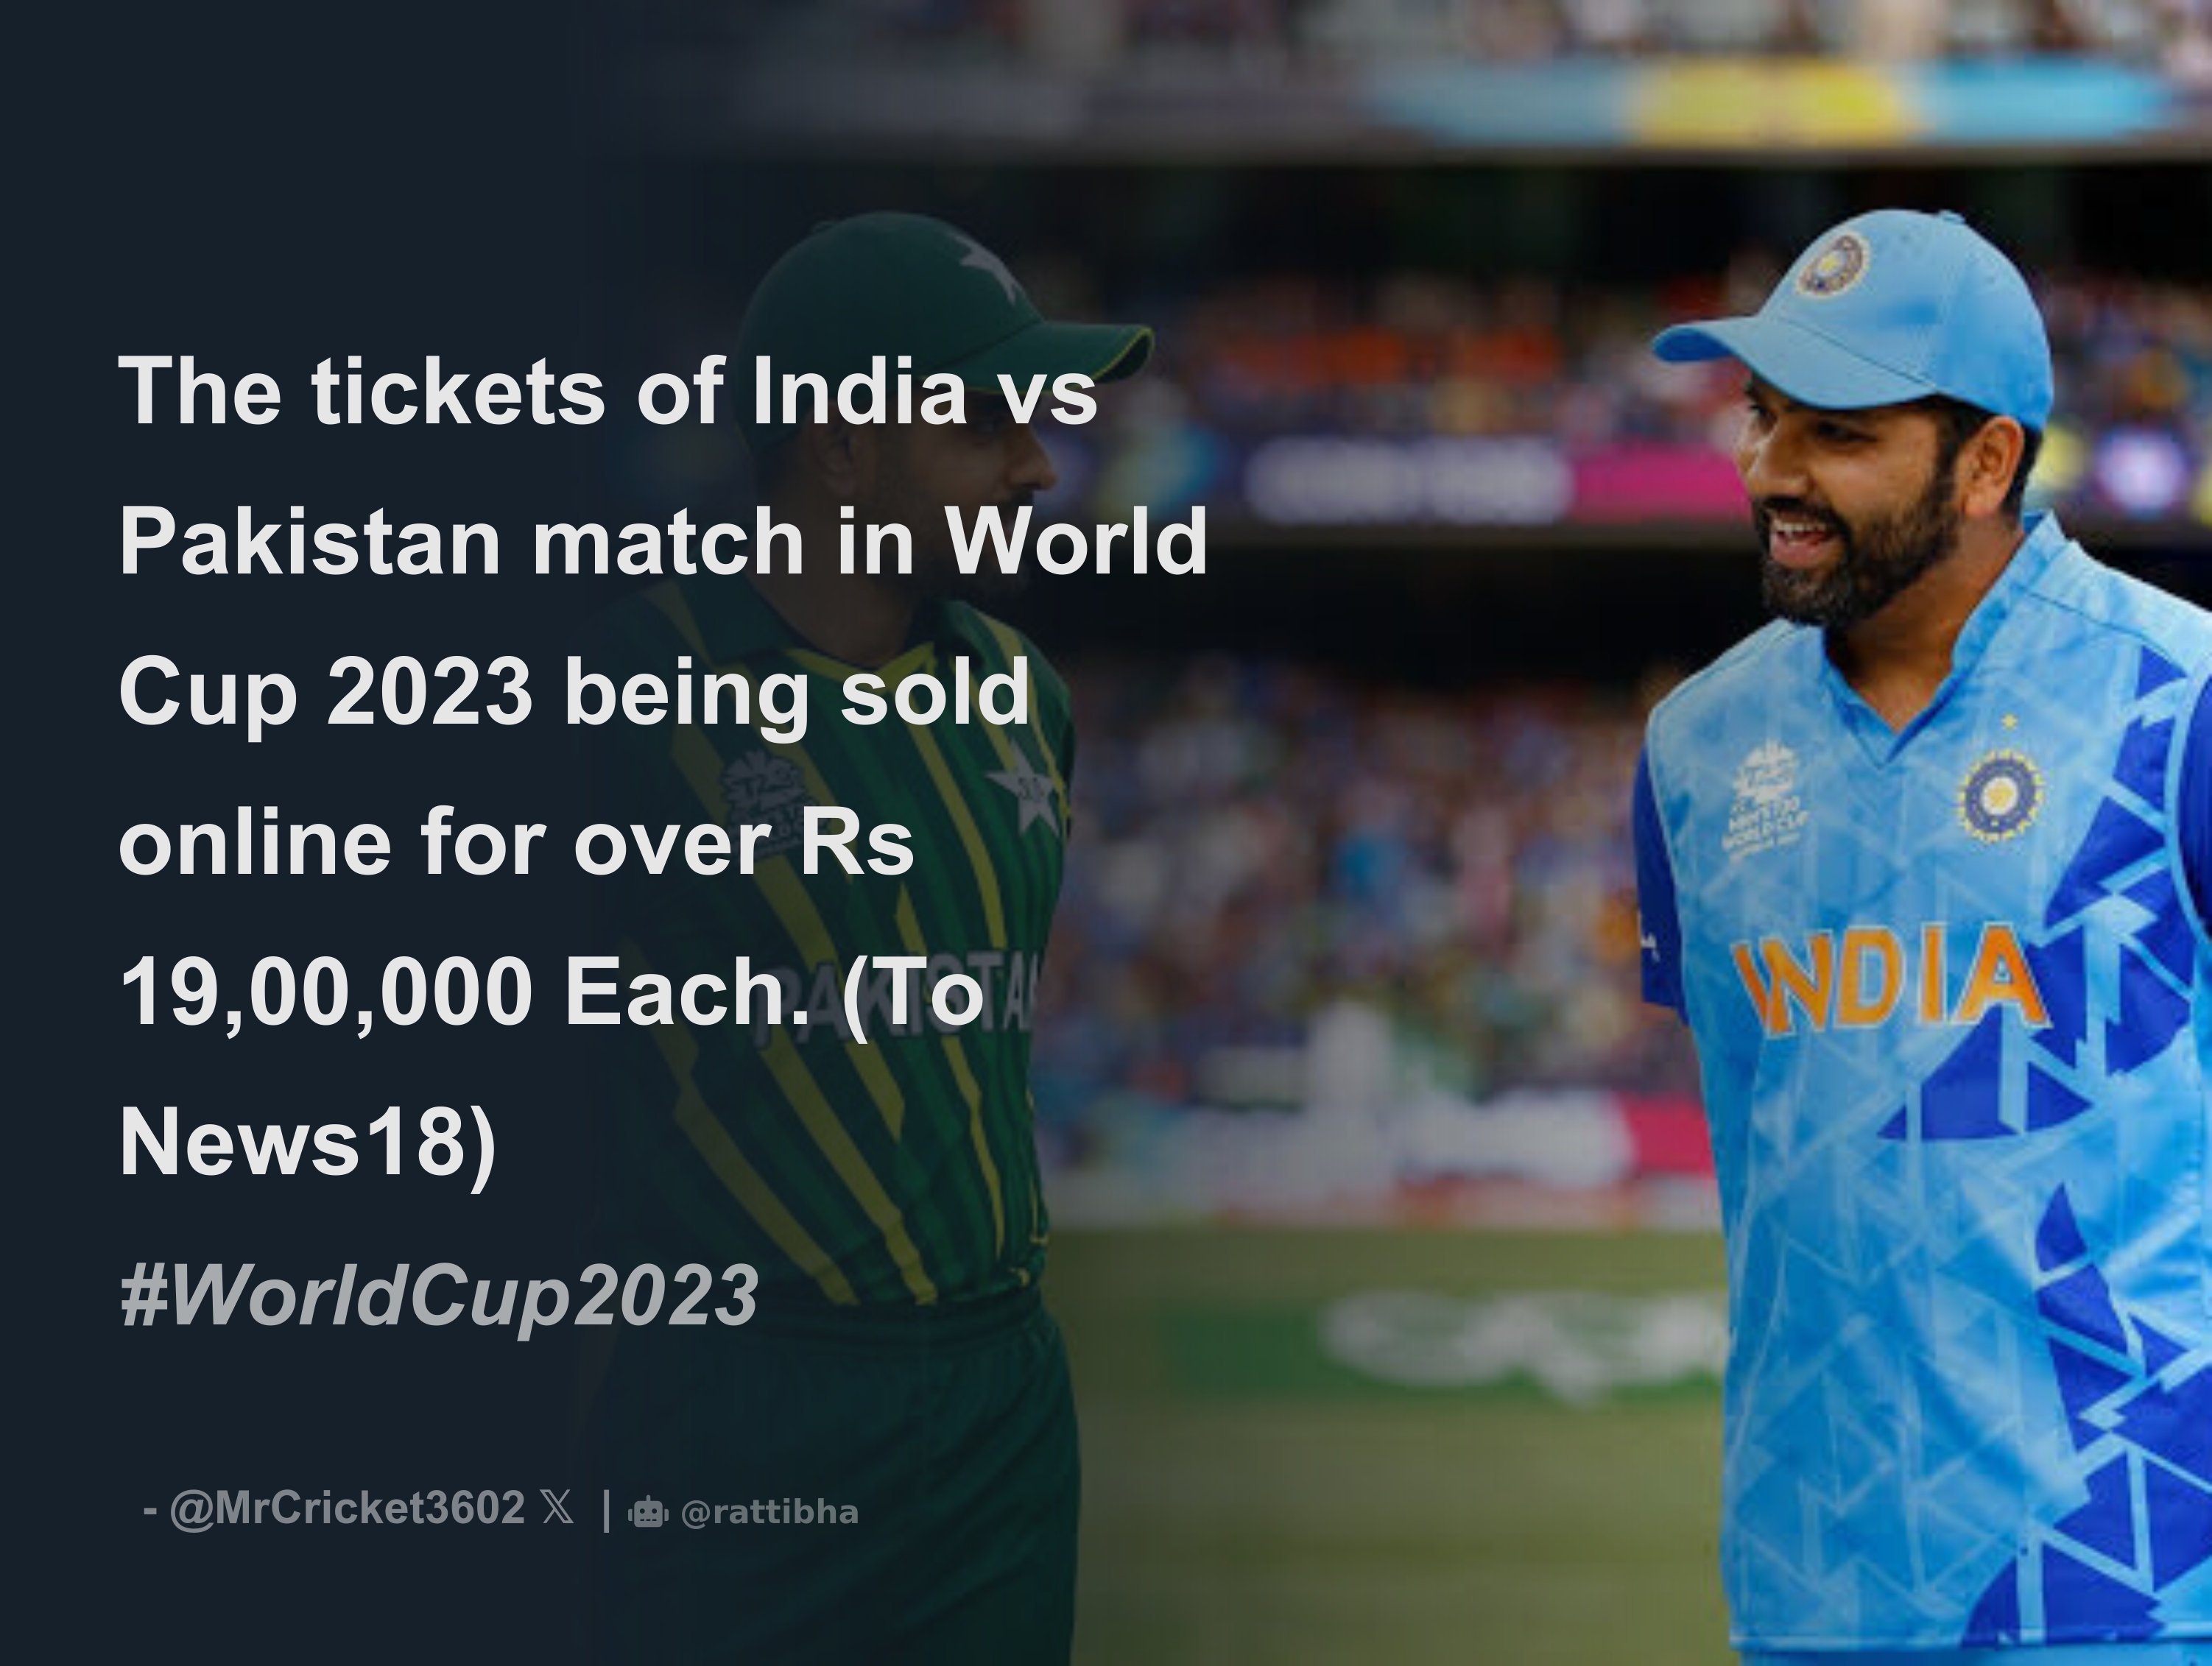 The tickets of India vs Pakistan match in World Cup 2023 being sold online for over Rs 19,00,000 Each